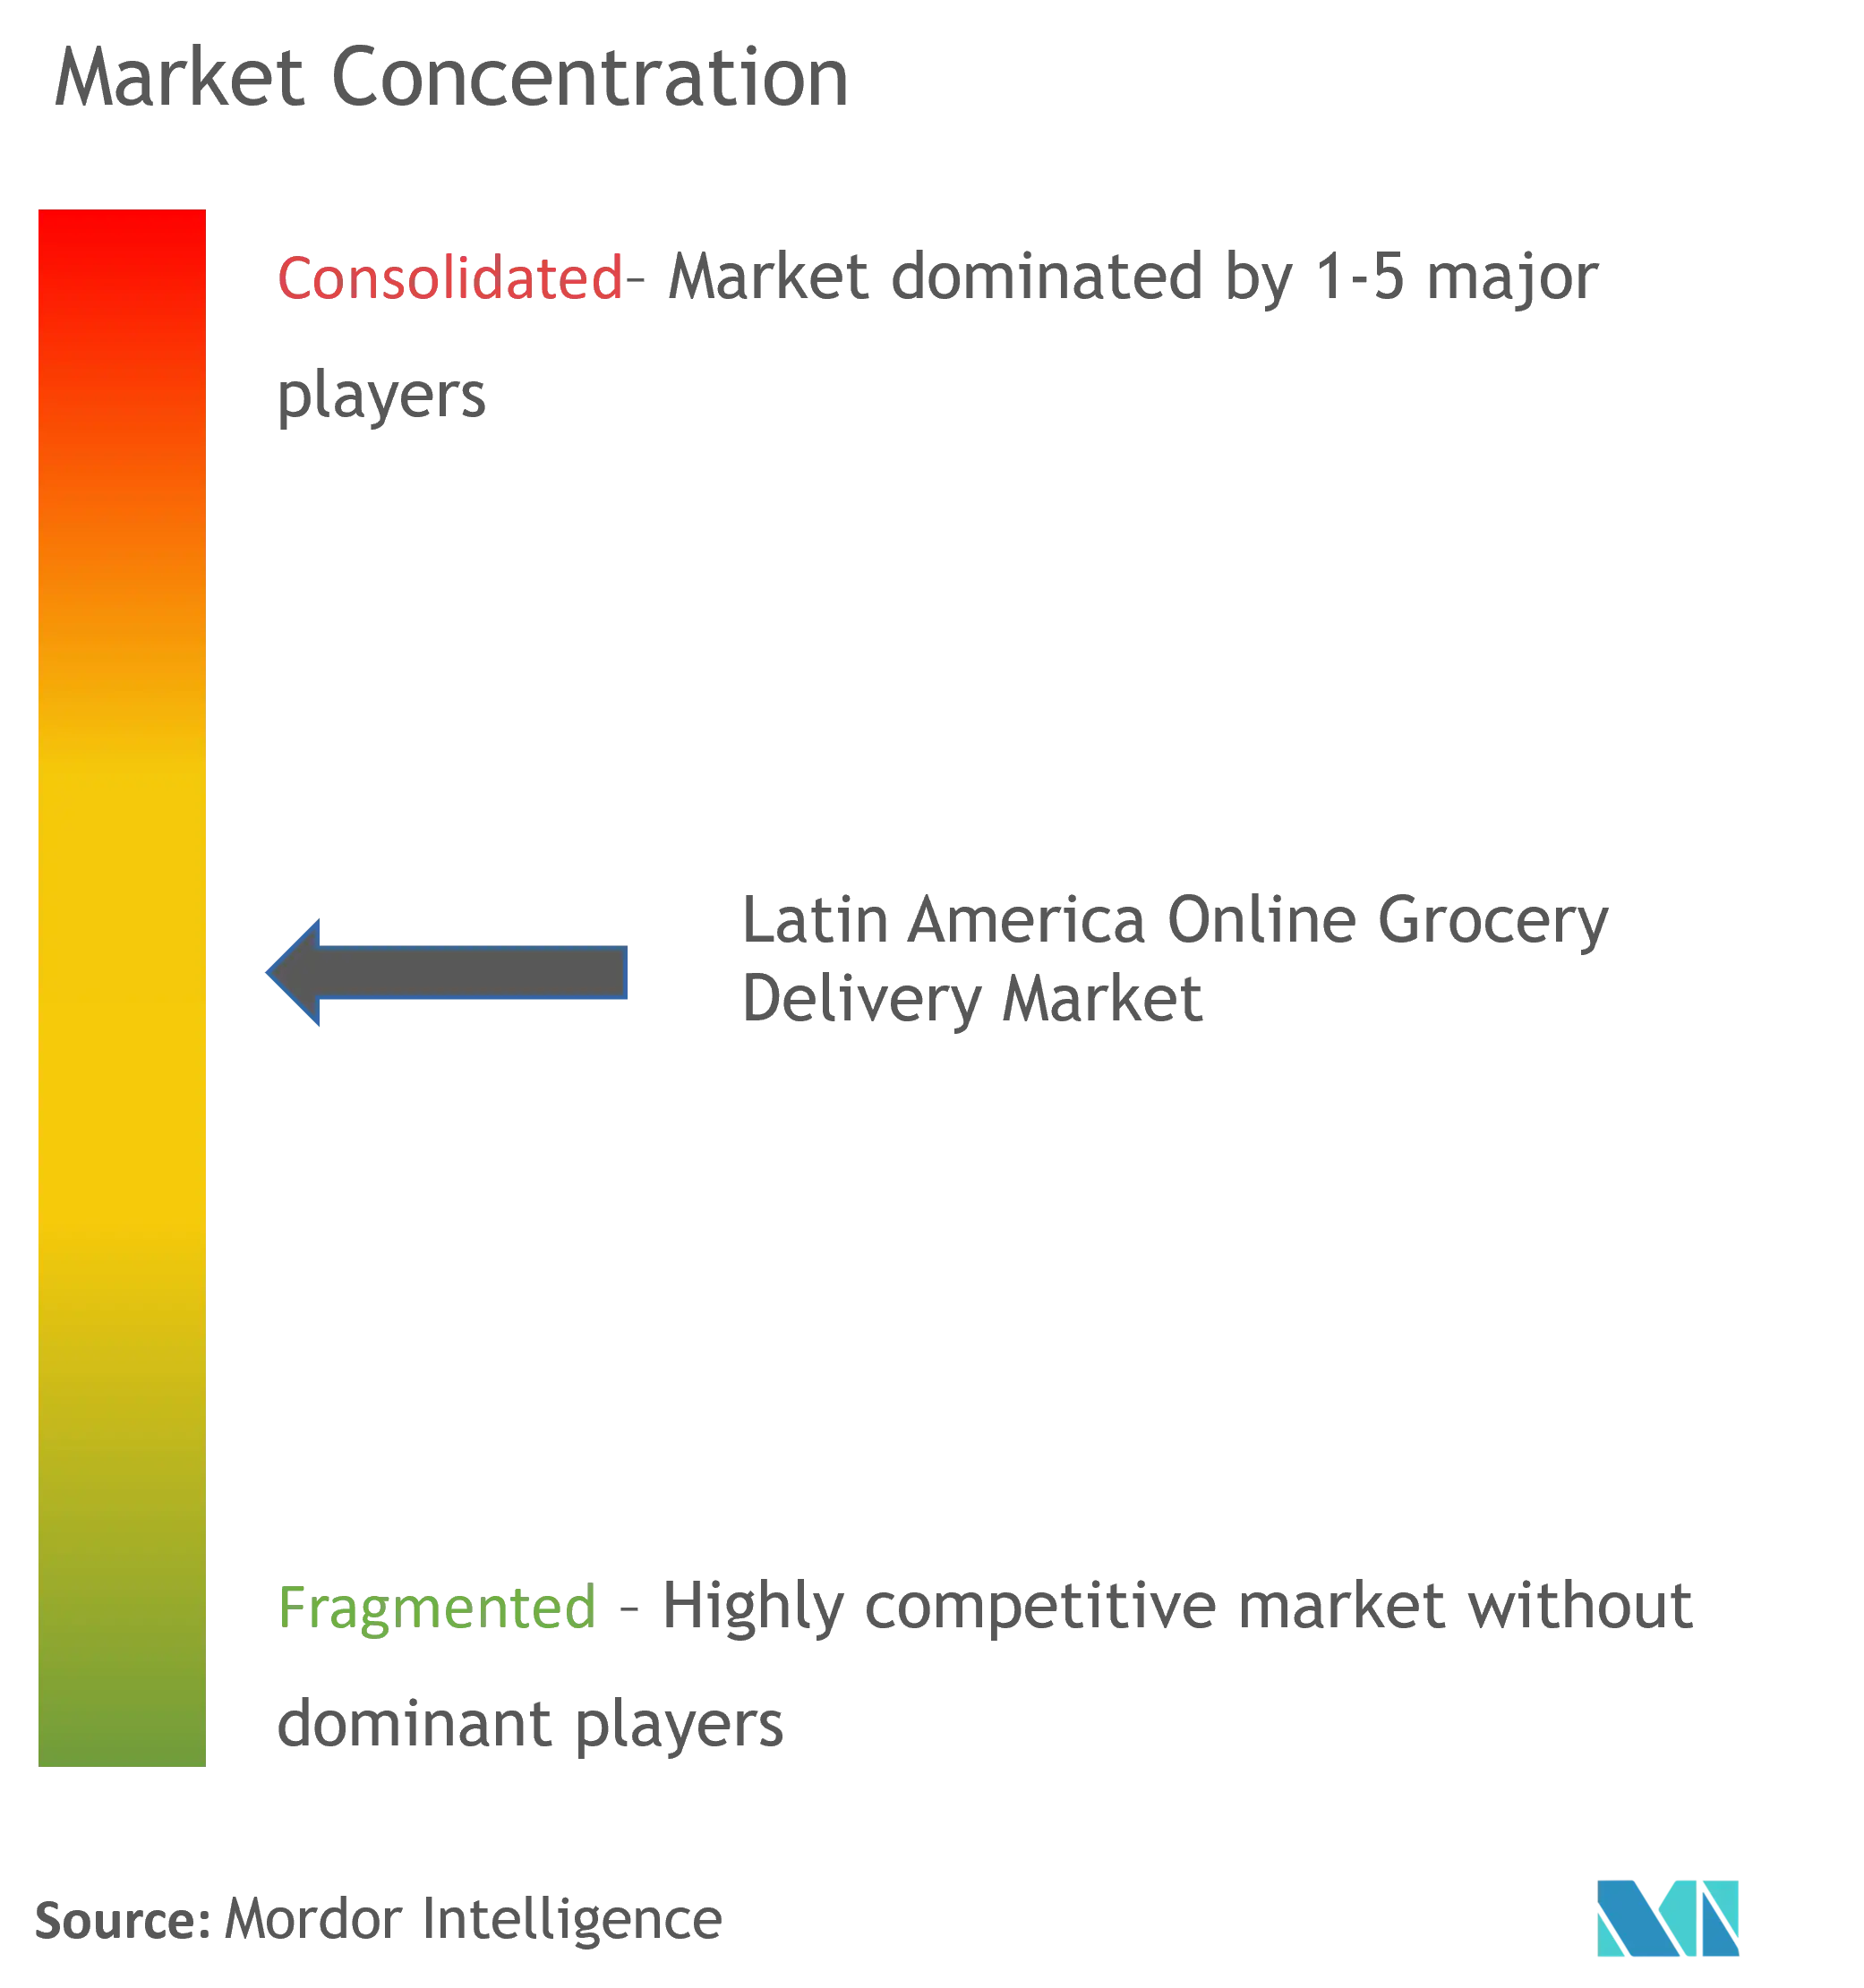 Latin America Online Grocery Market Concentration